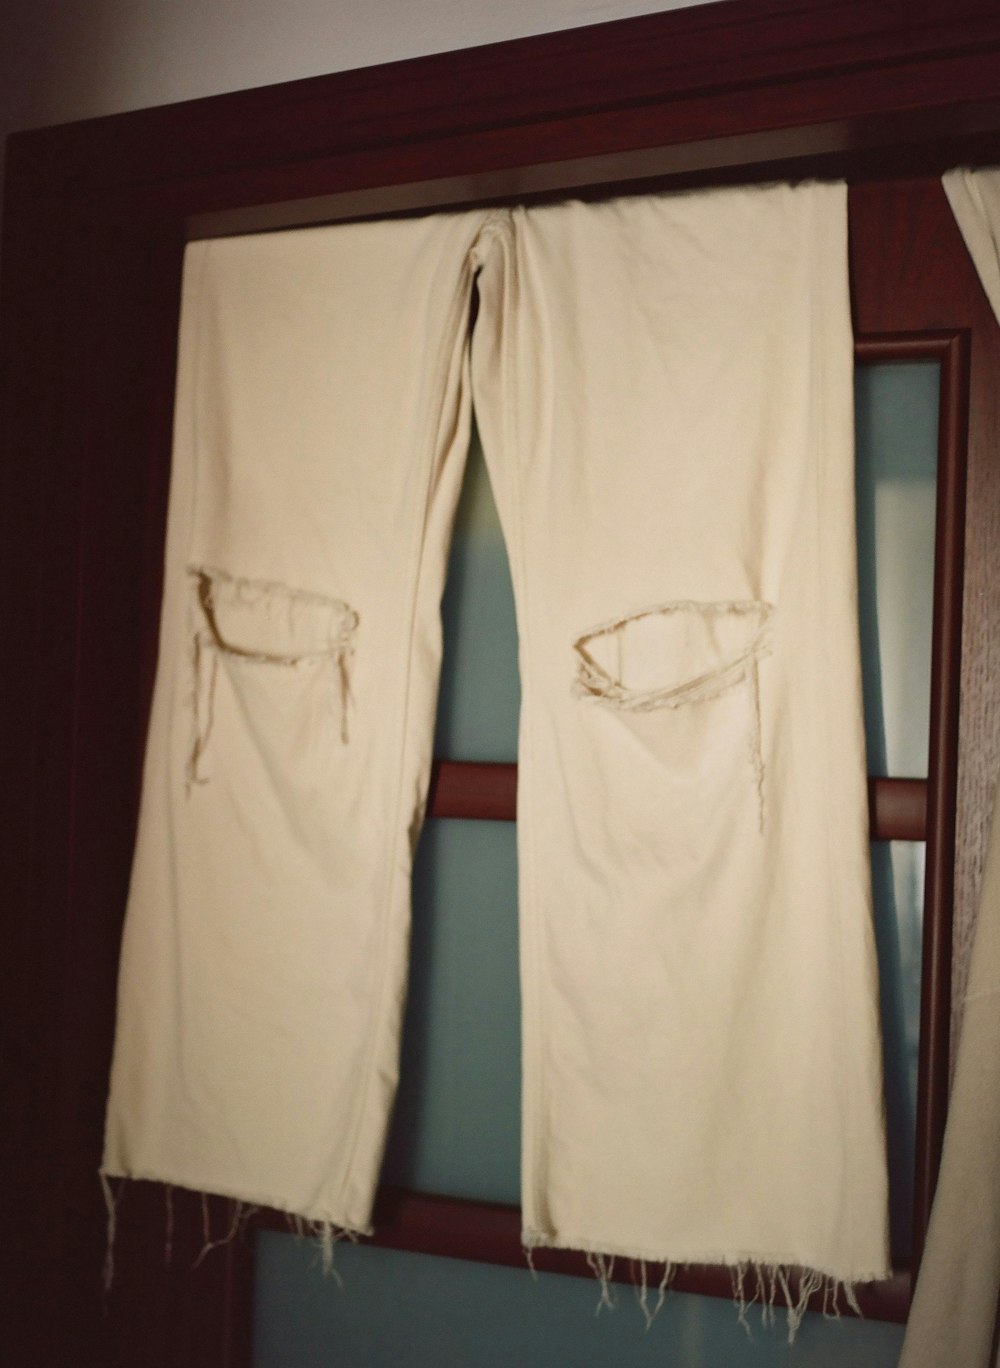 a pair of white jeans hanging from a window